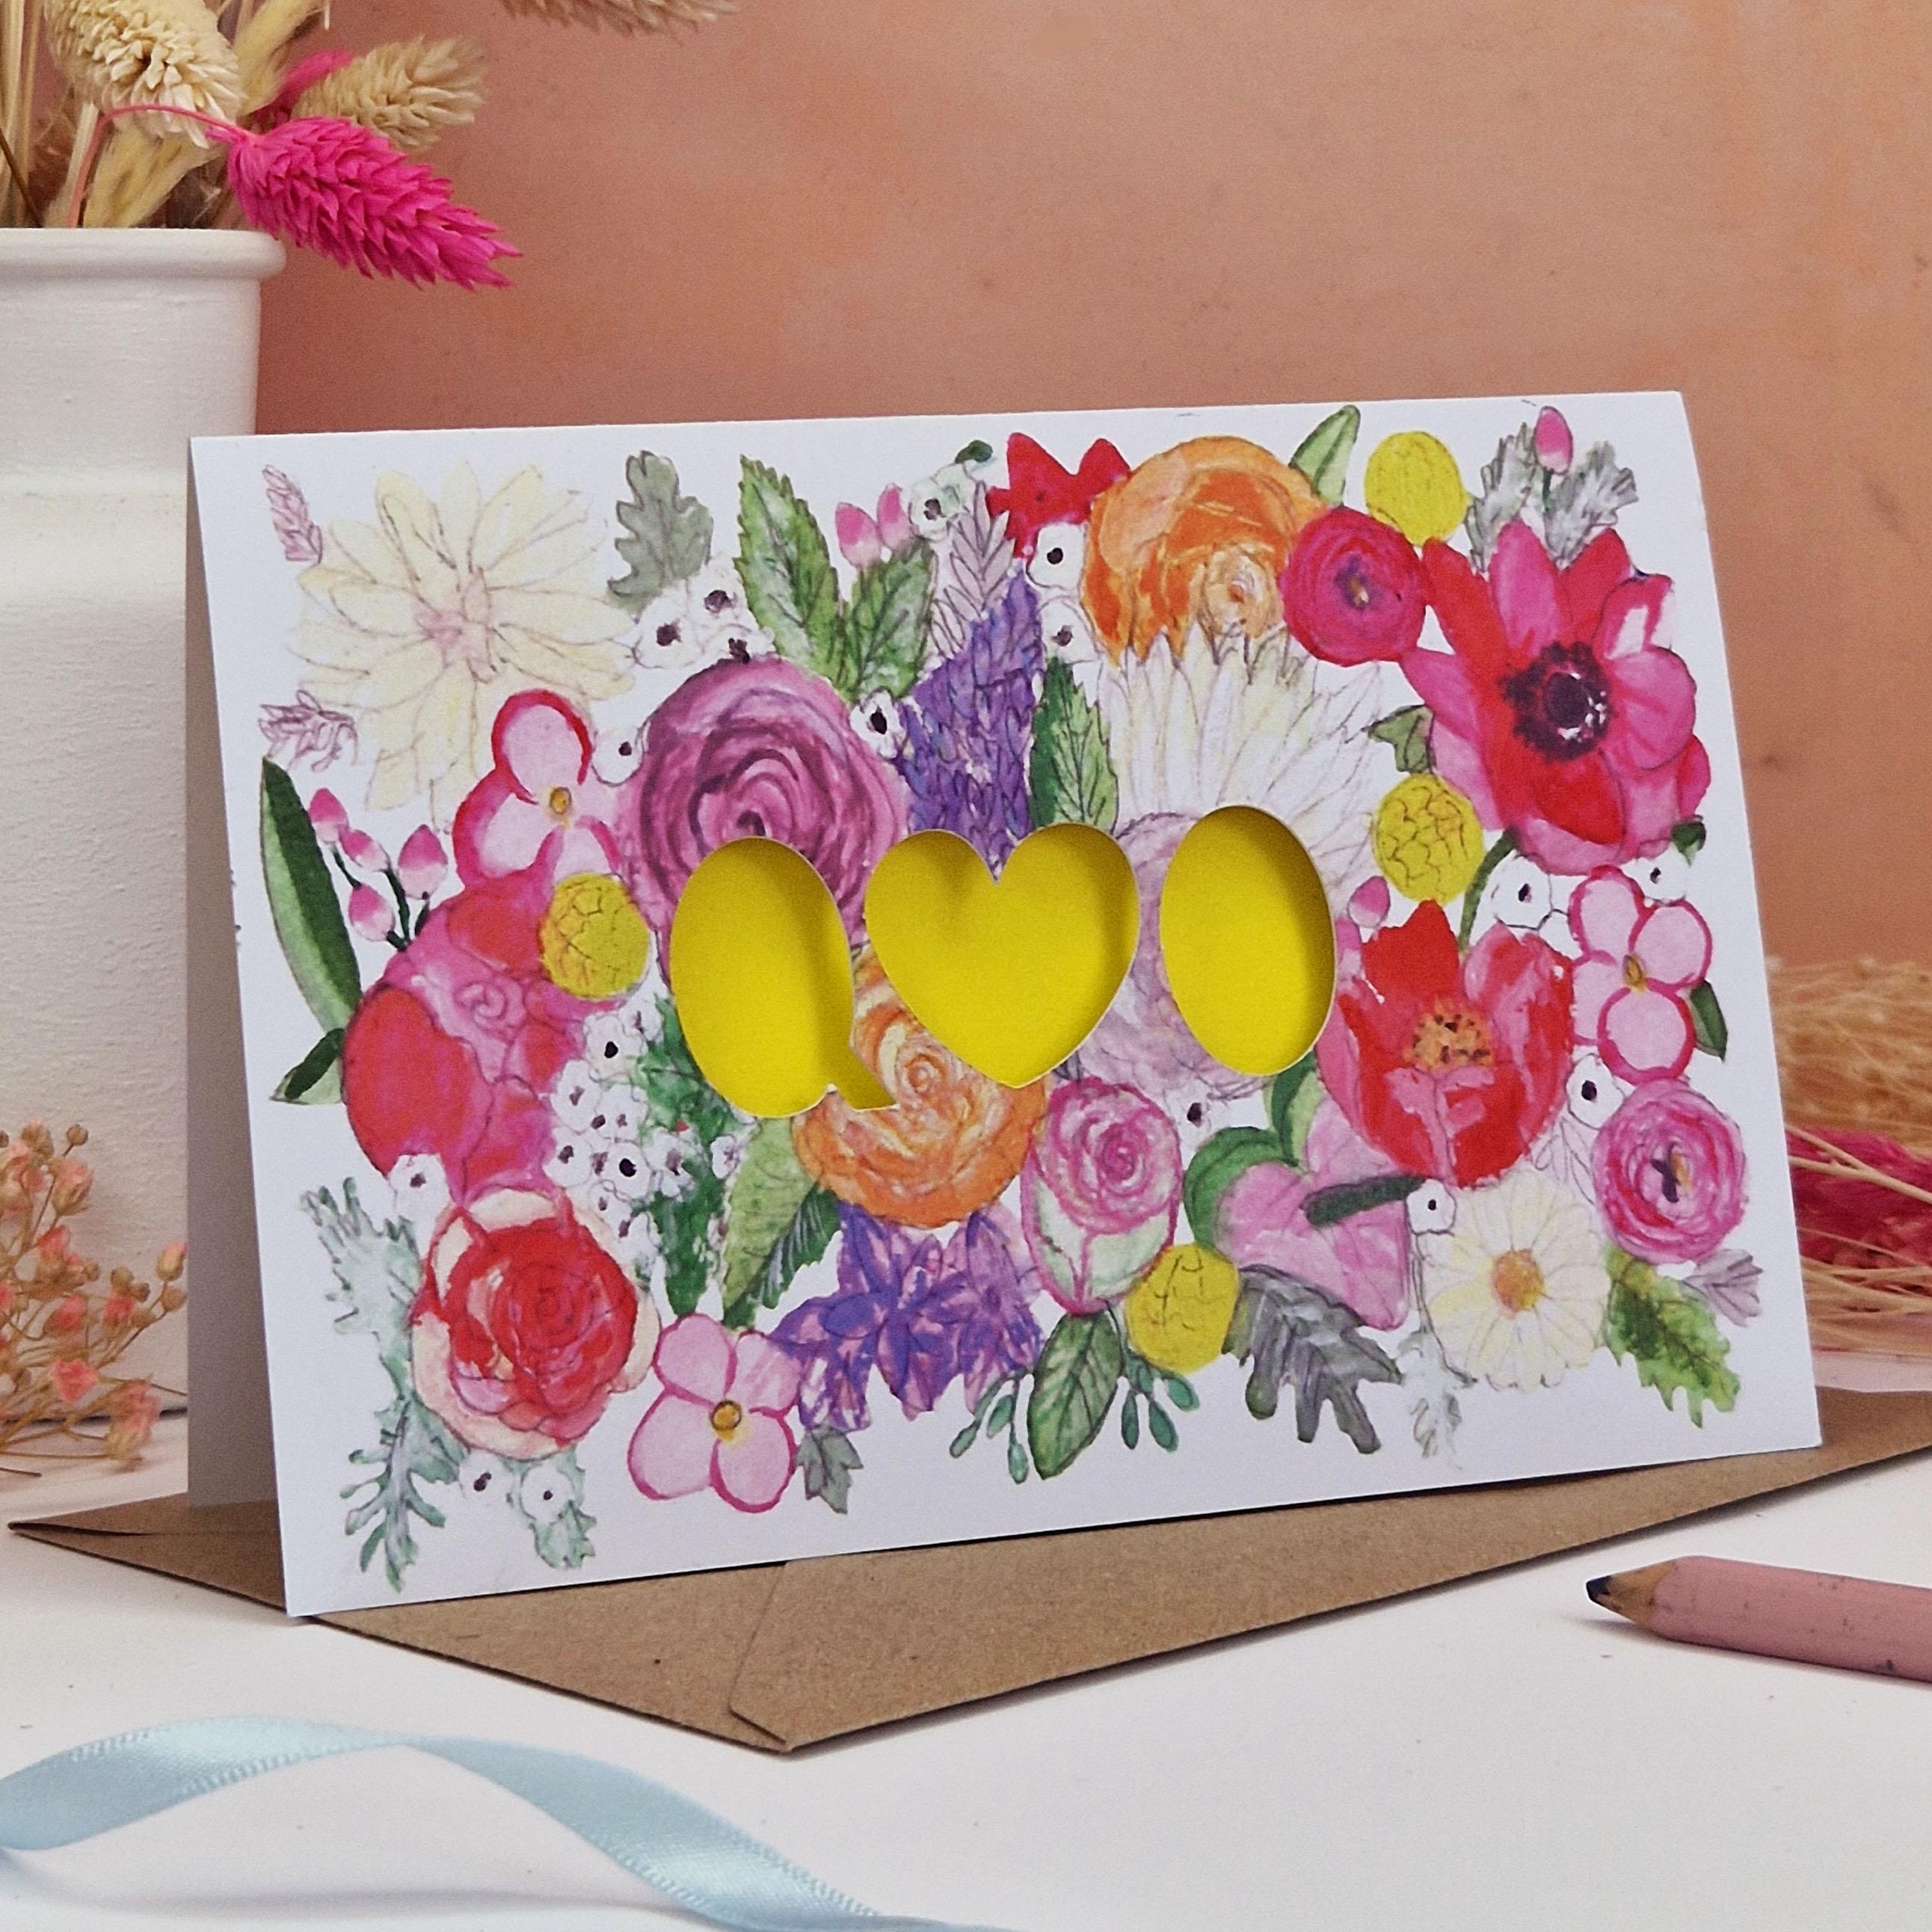 Floral Card with Paper cut text that is personalised with Initials with bright floral background and orange paper liner inside.